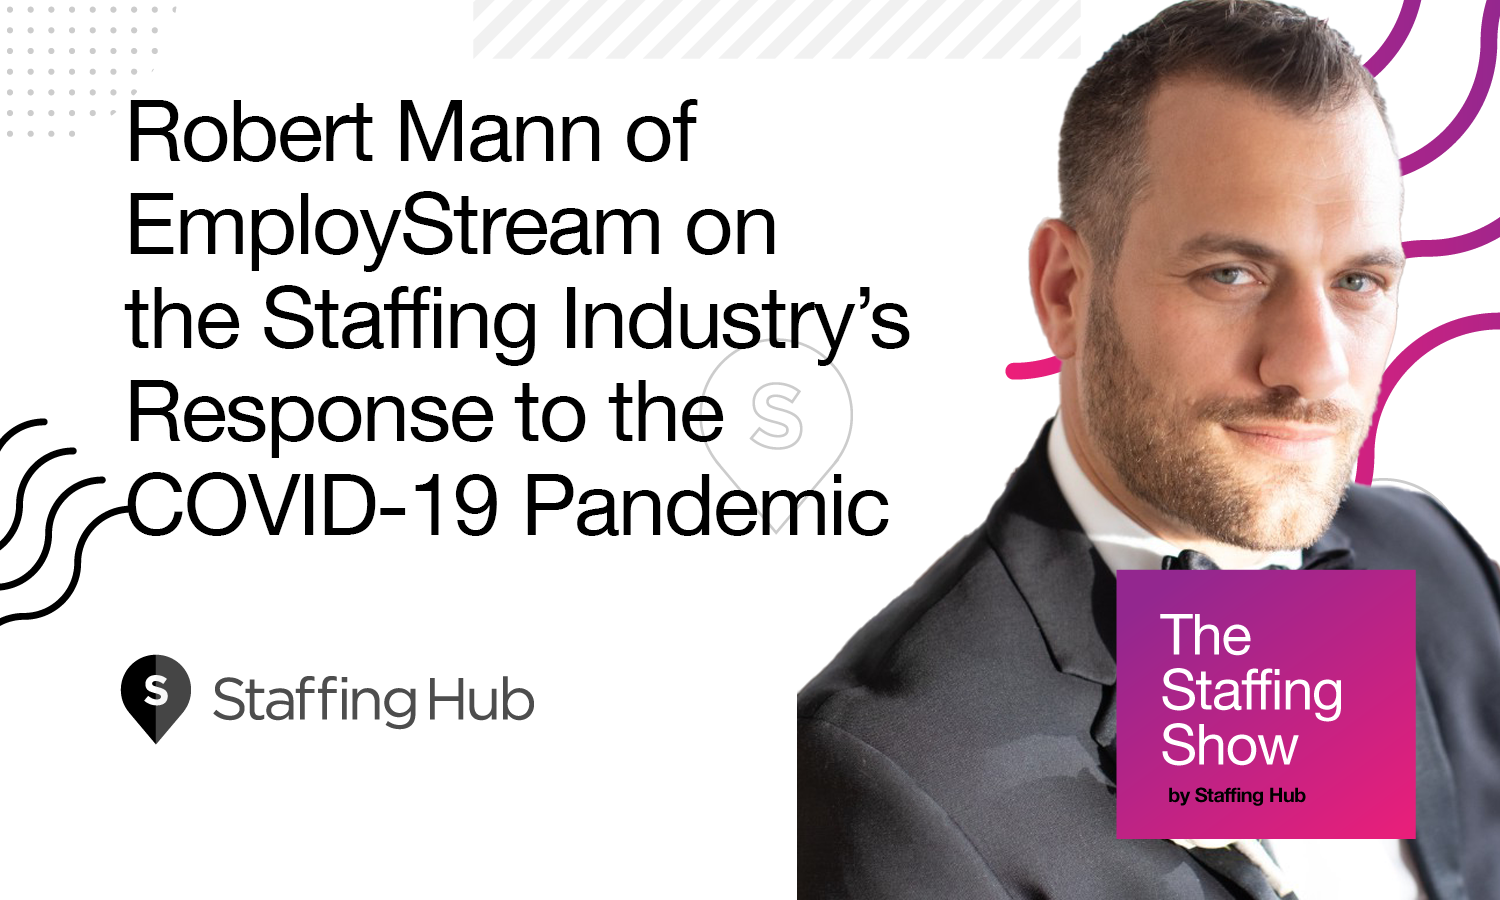 Rob Mann of EmployStream on the Staffing Industry’s Response to the COVID-19 Pandemic